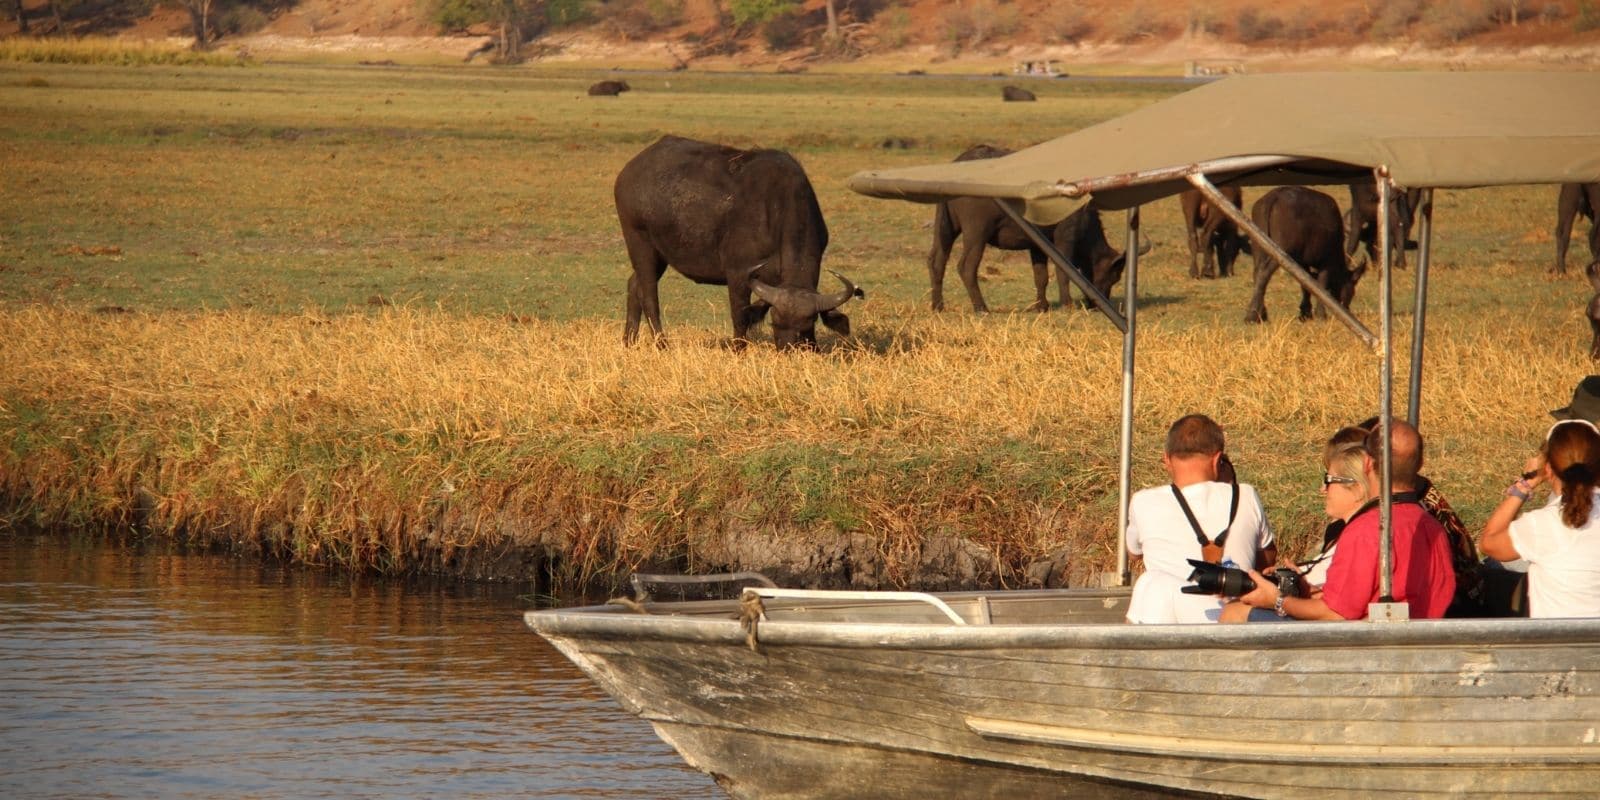 Safari by Boat on the Chobe River - Safari guests viewing and photographing buffalo on the river bank from their boat. Boat is in the foreground, buffalo on bank grazing in background.